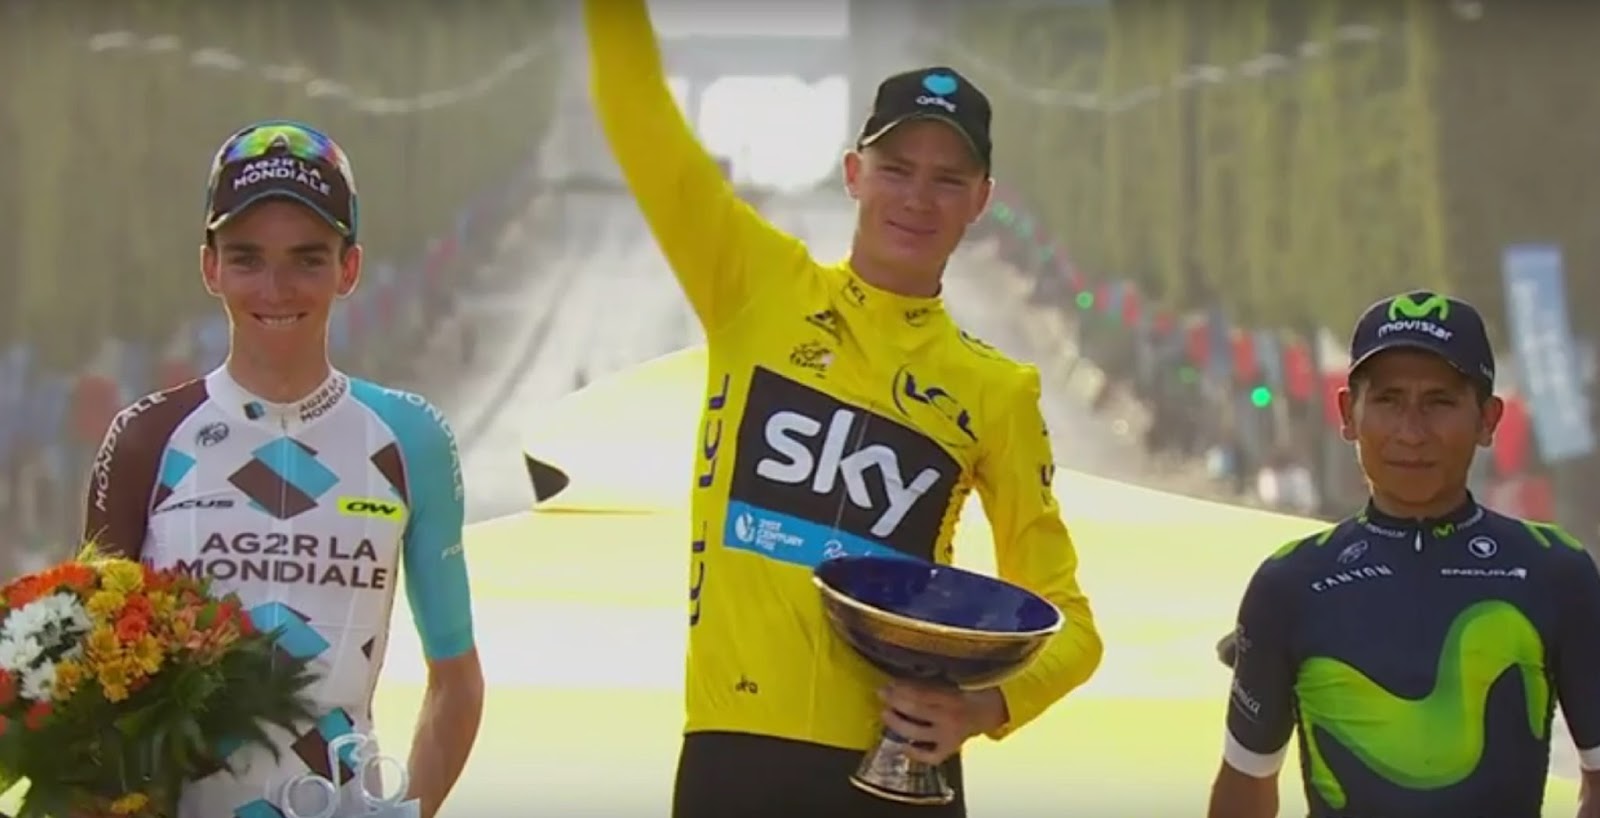 CHRIS FROOME 8